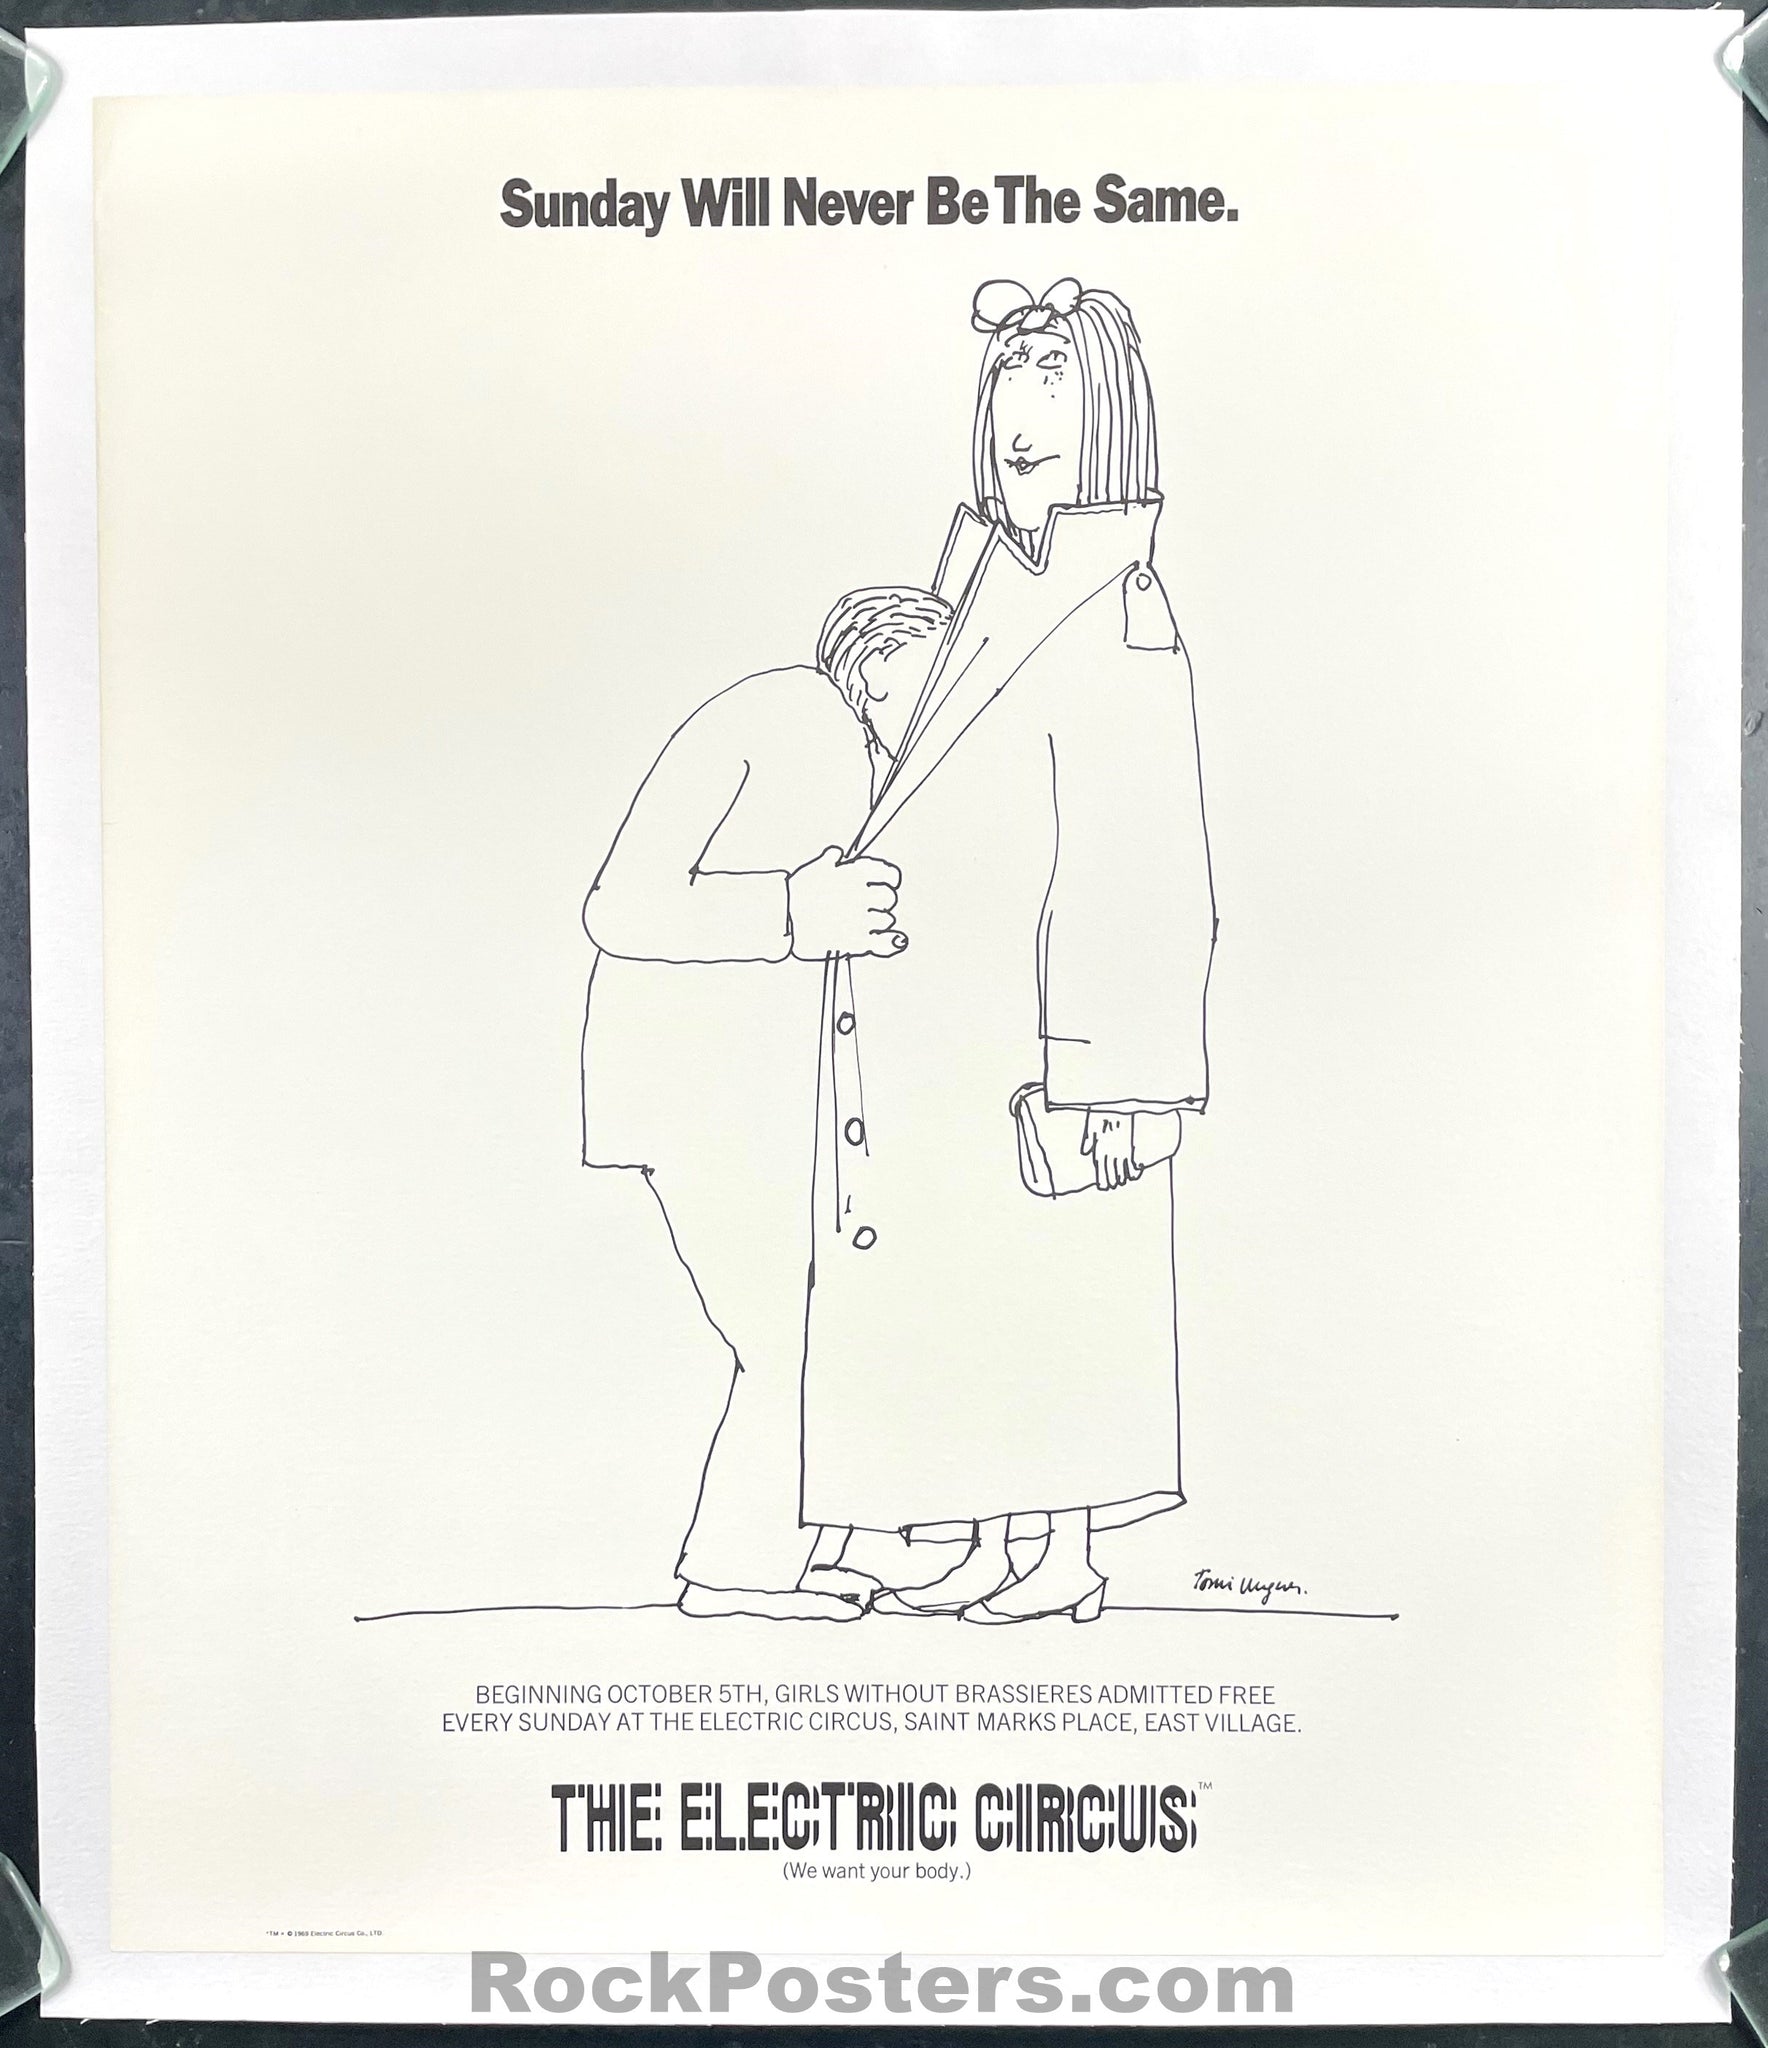 AUCTION - Electric Circus - Tomi Ungerer - Sunday Will Never Be The Same - 1969 Poster - New York City - Near Mint